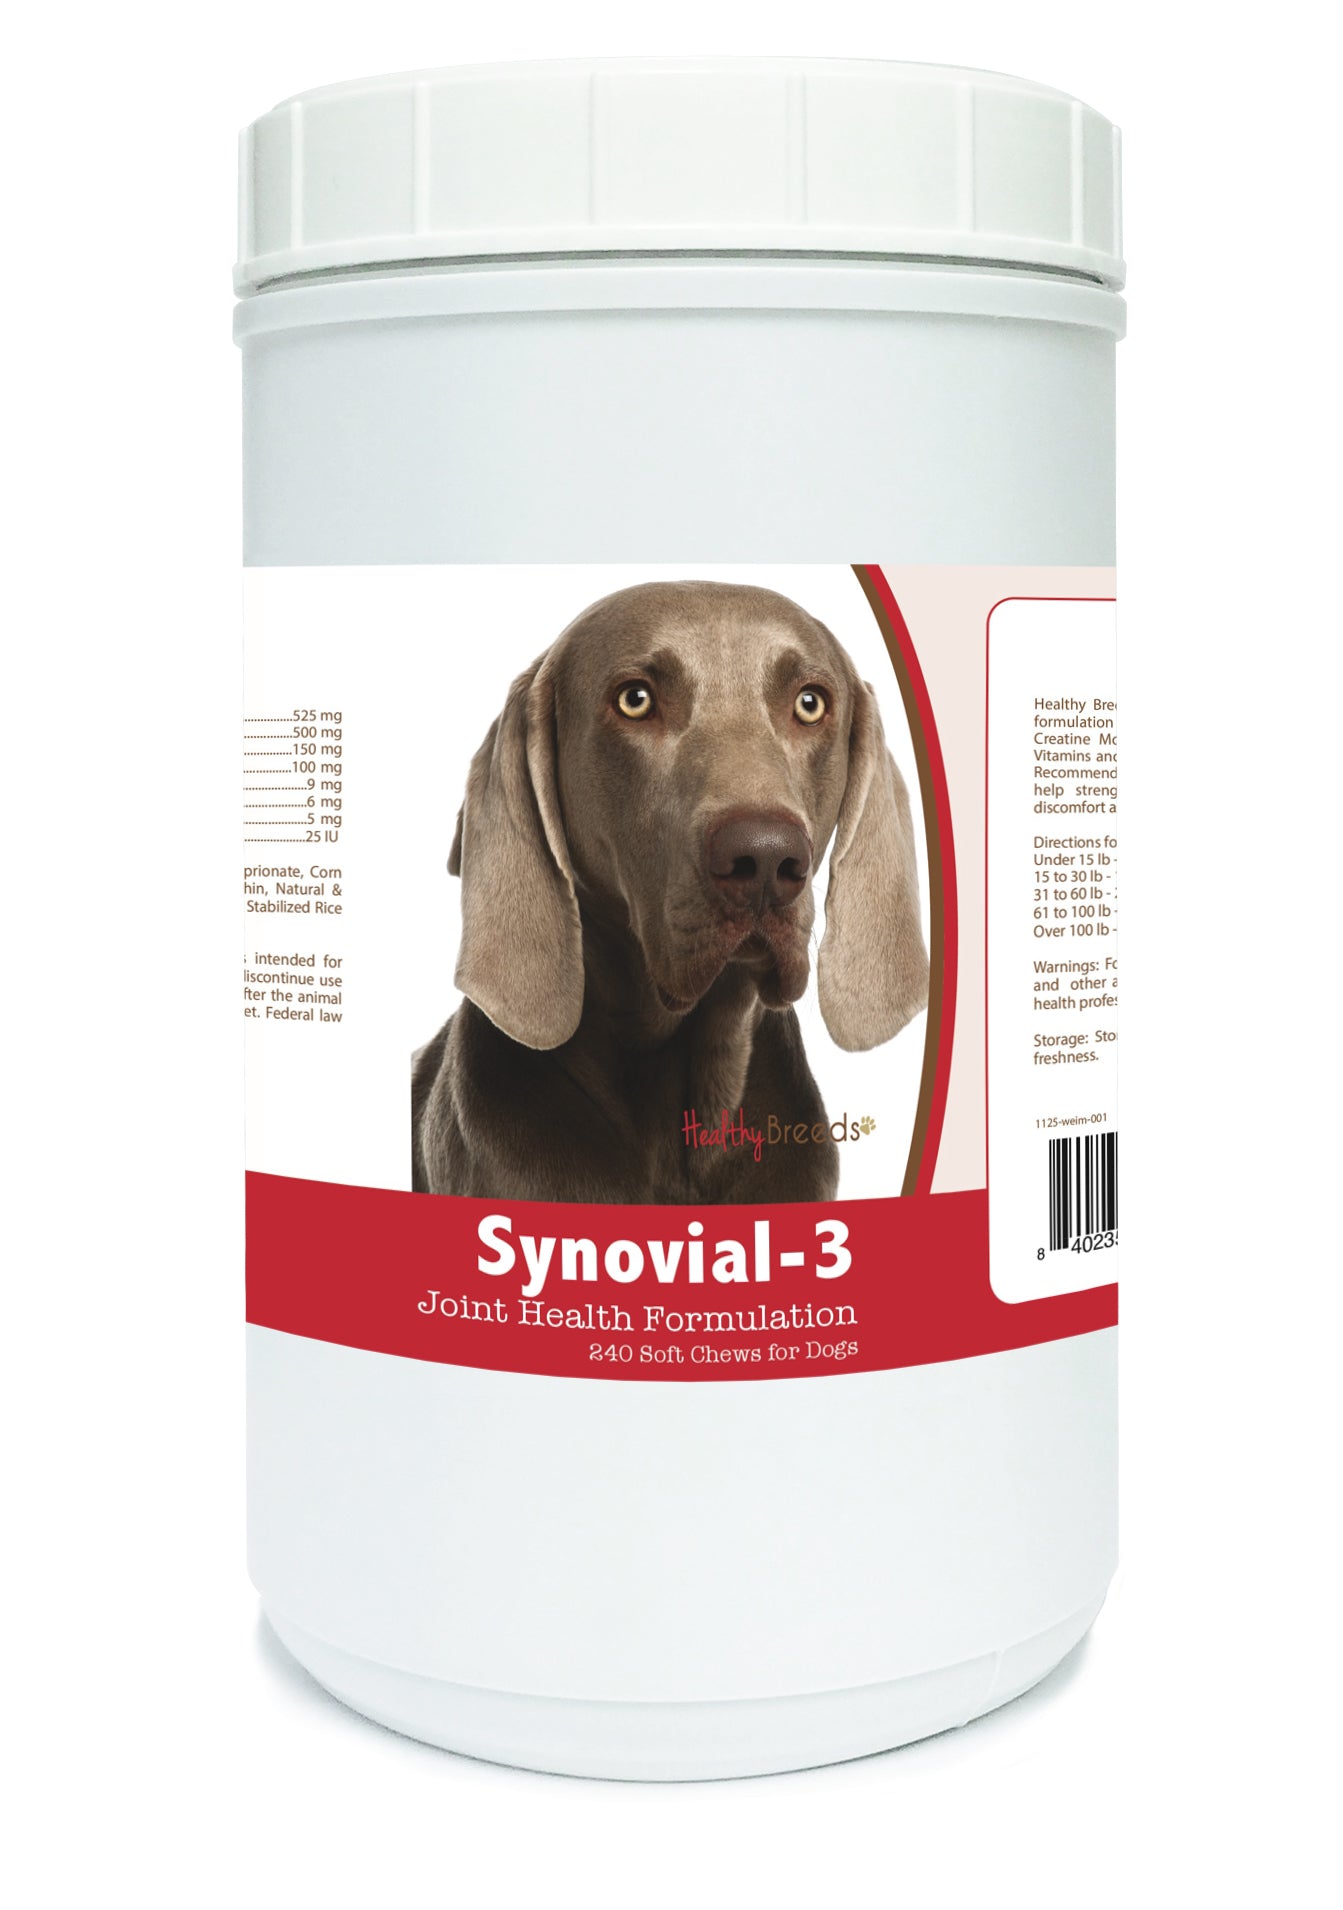 Weimaraner Synovial-3 Joint Health Formulation Soft Chews 240 Count